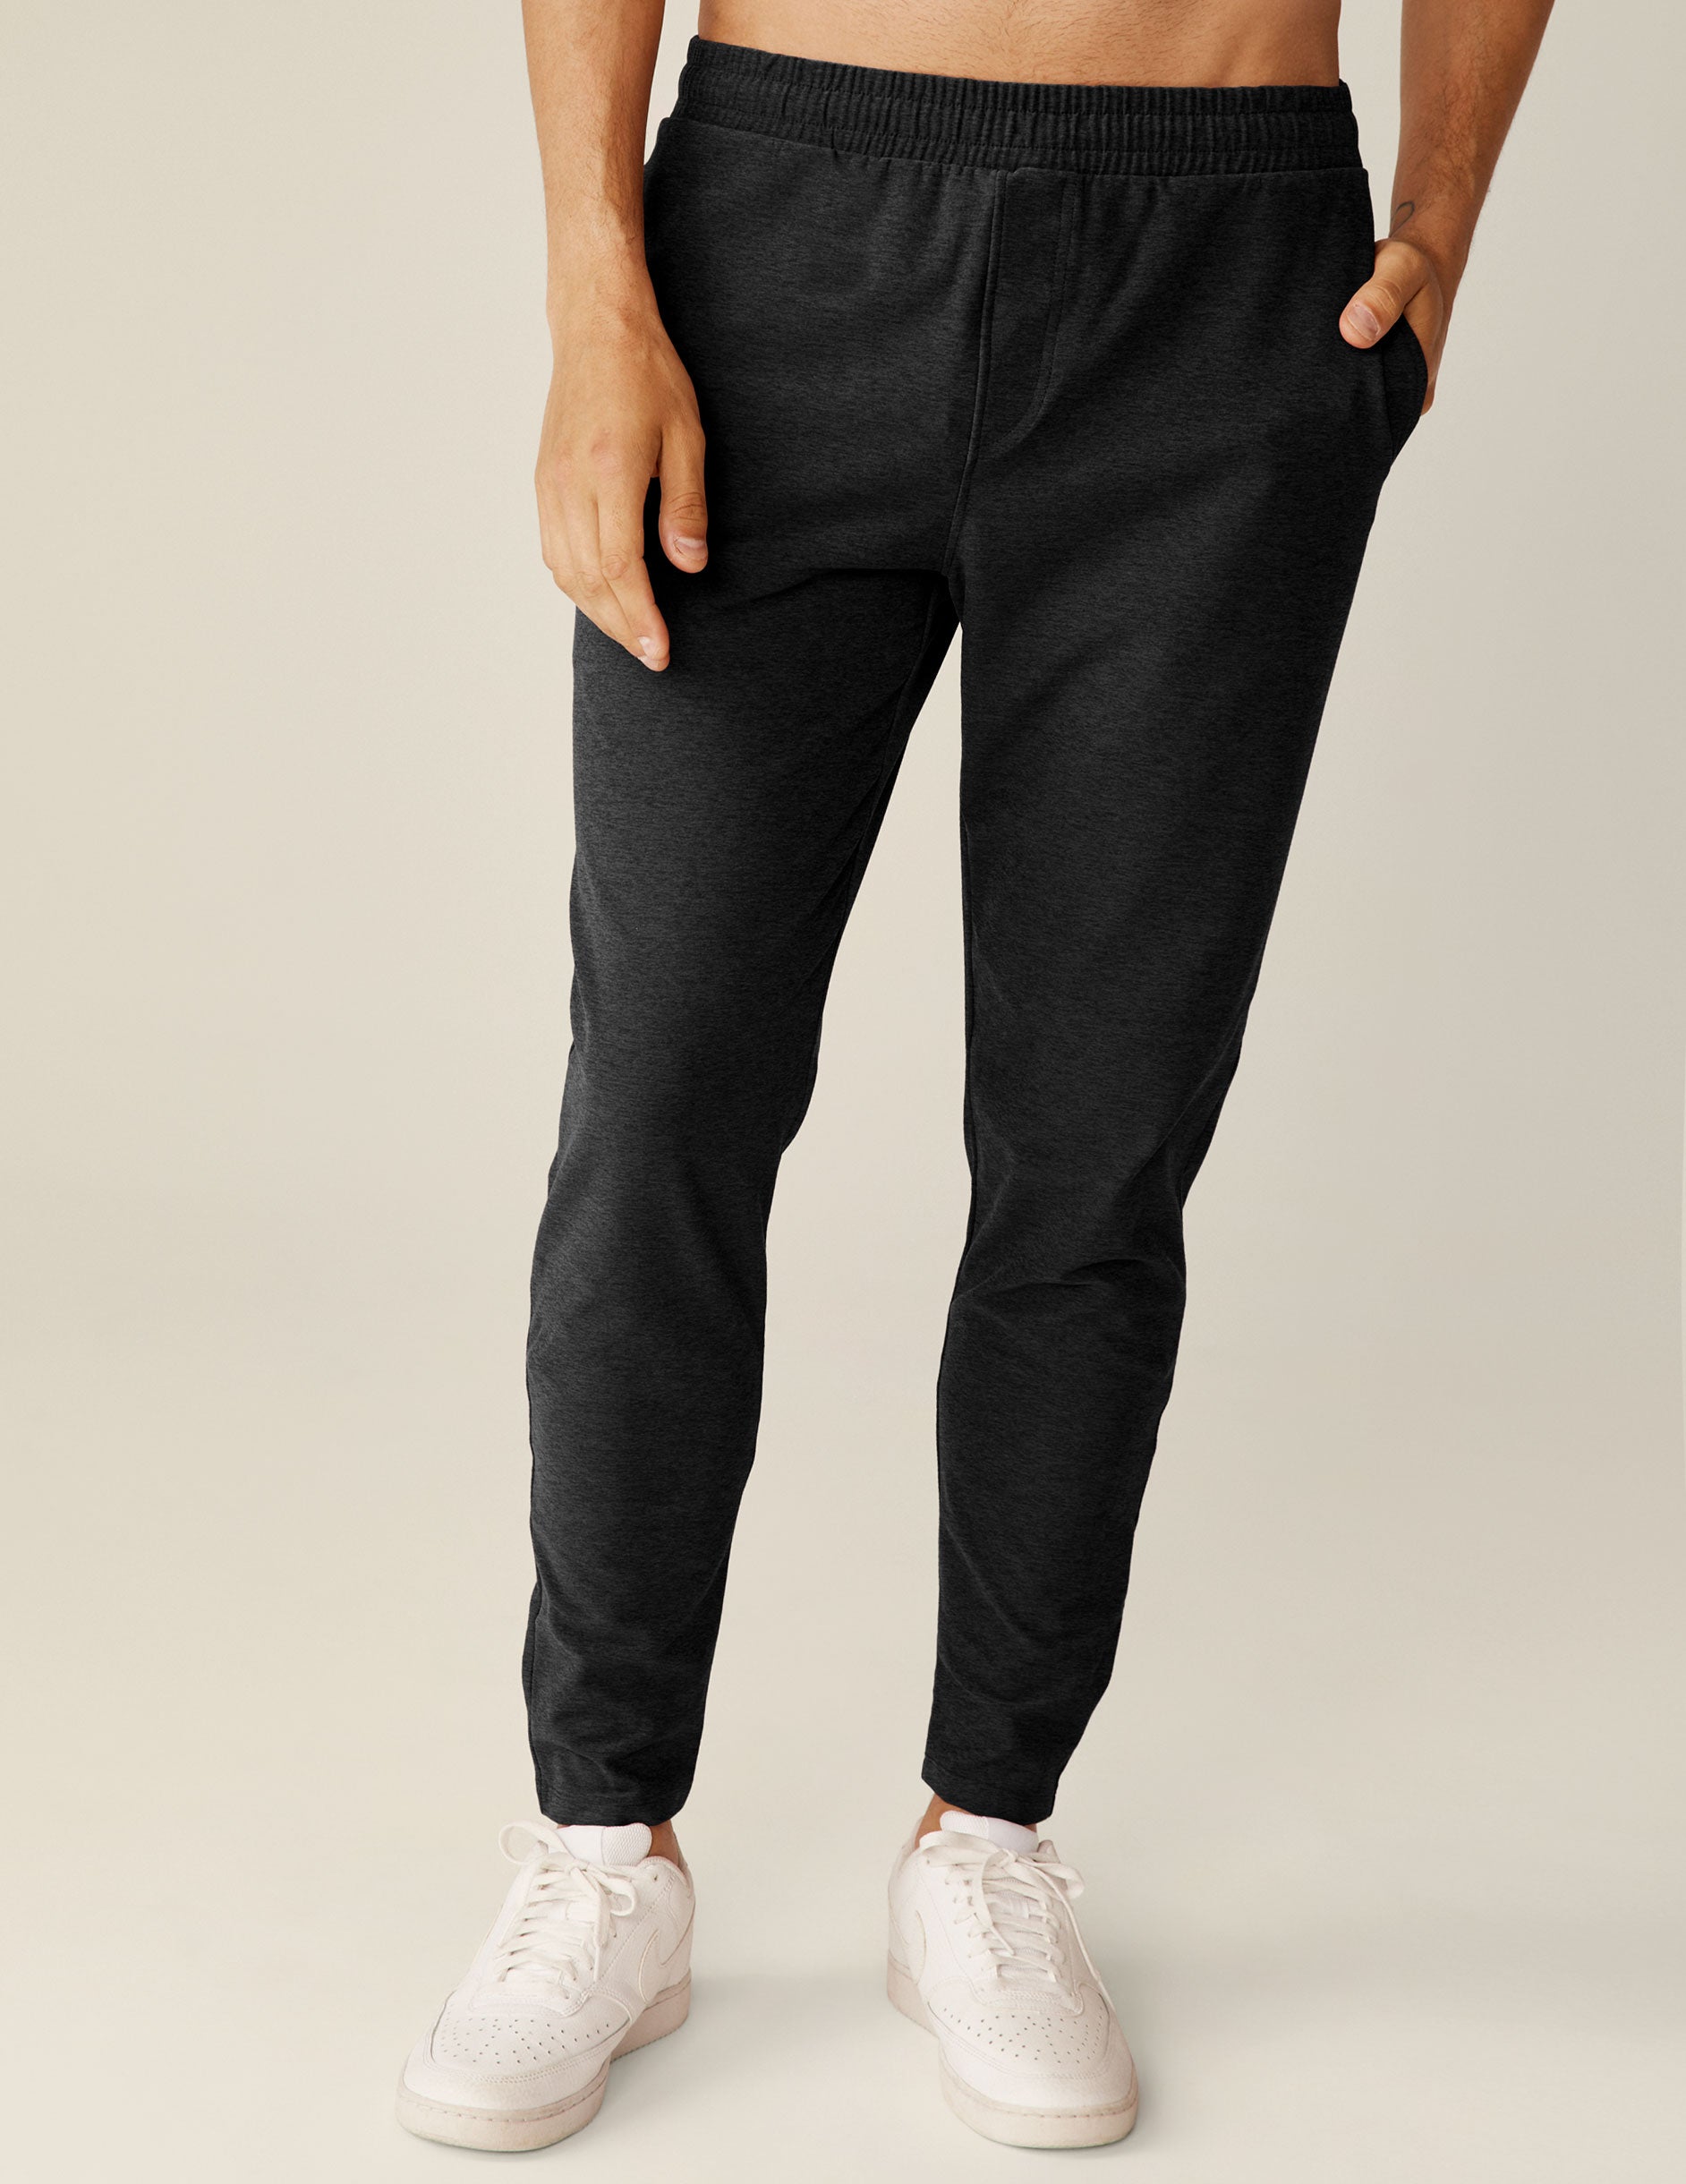 black men's athleisure pants with an internal drawcord and pockets.